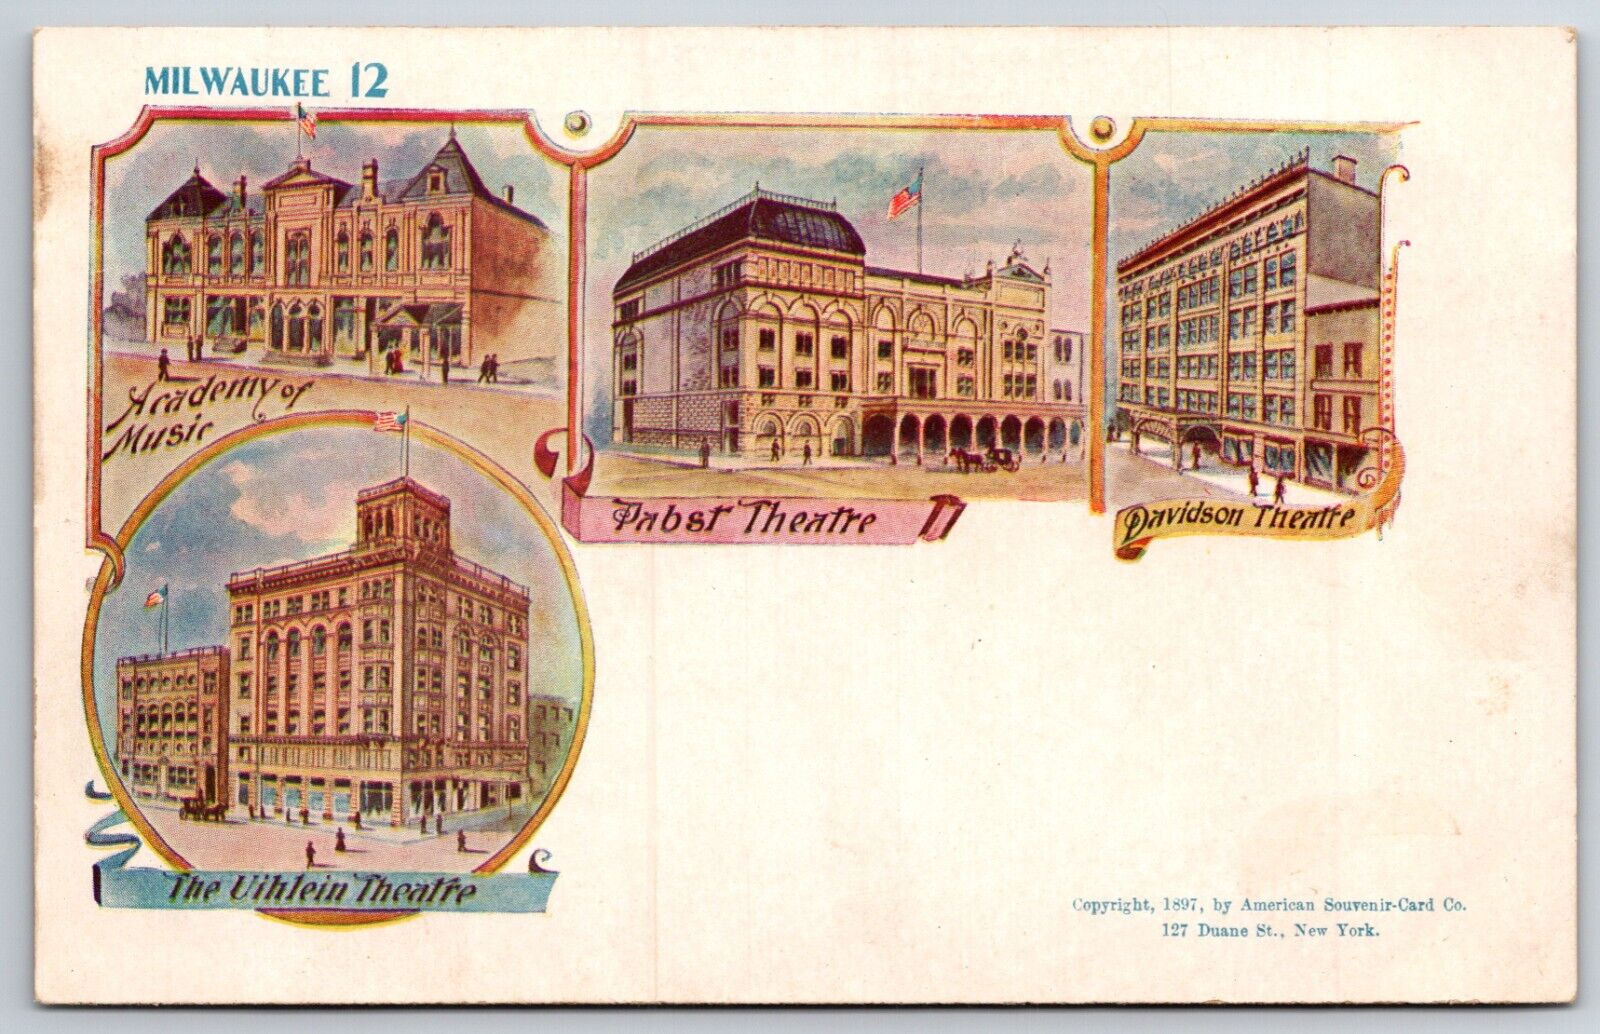 Pabst Theatre Milwaukee - American Souvenir Card Co. - Unposted Post Card c1897